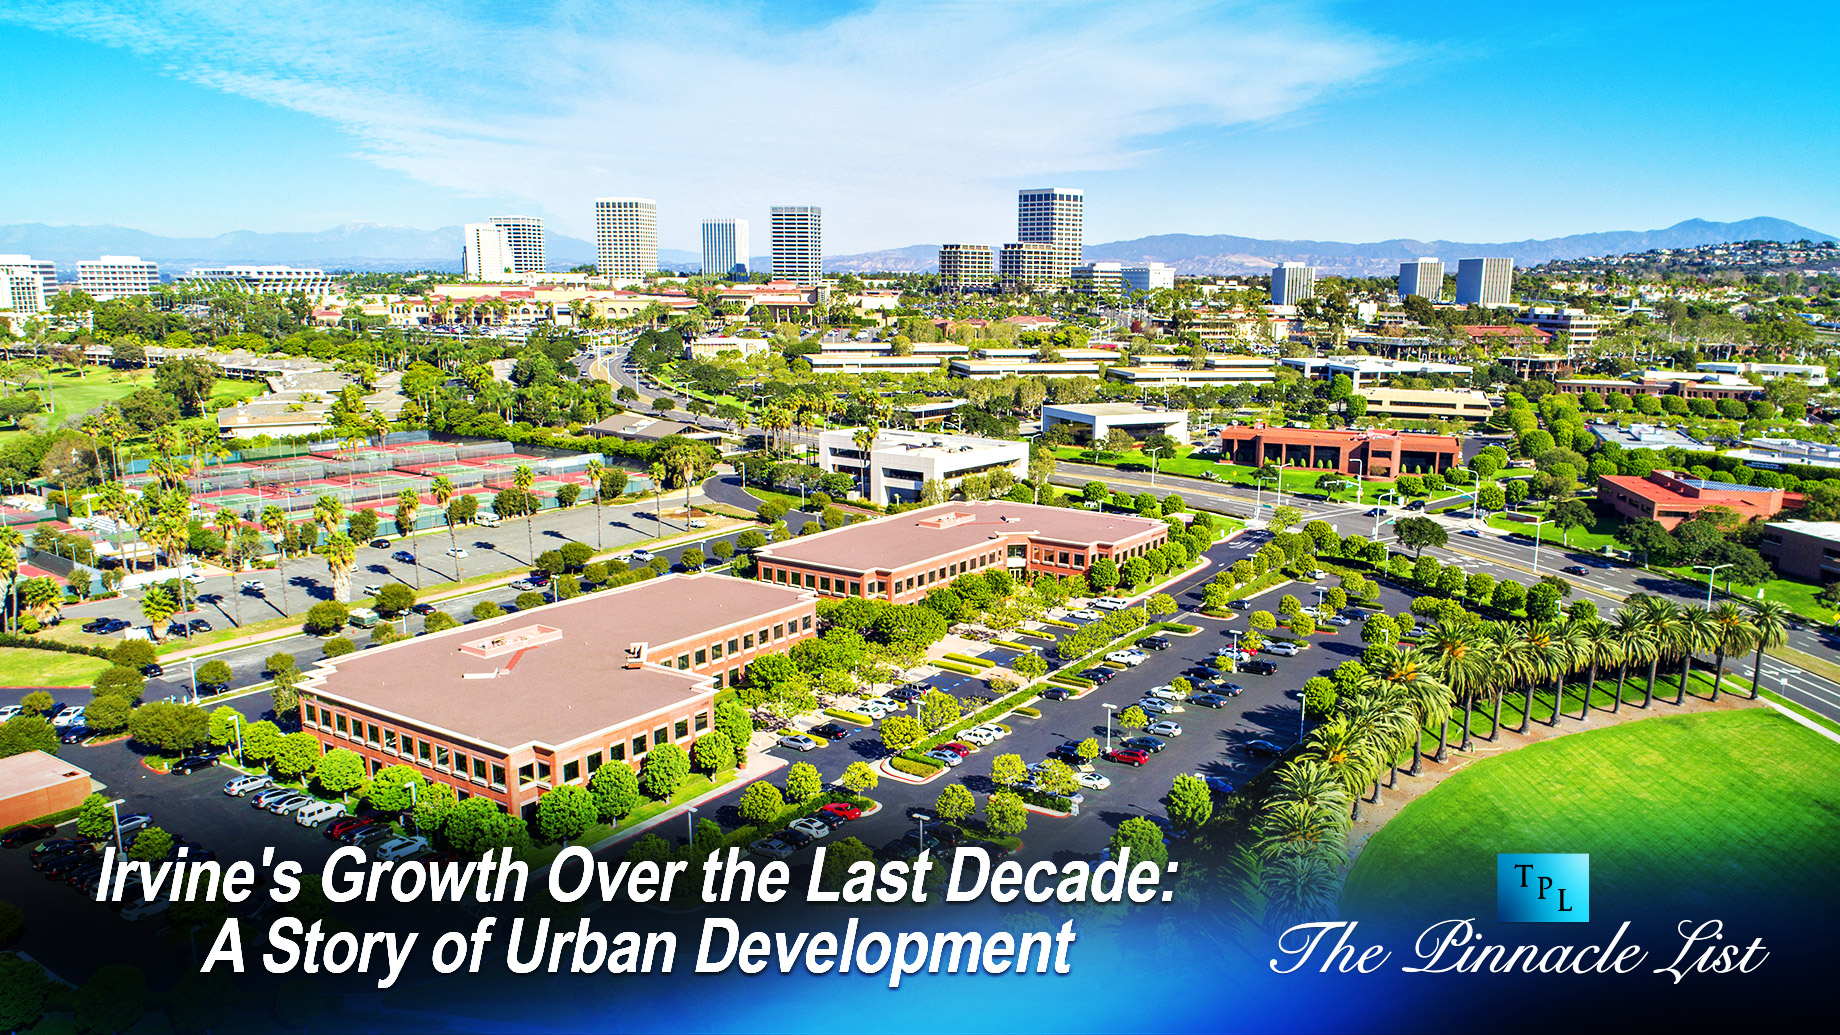 Irvine’s Growth Over the Last Decade: A Story of Urban Development